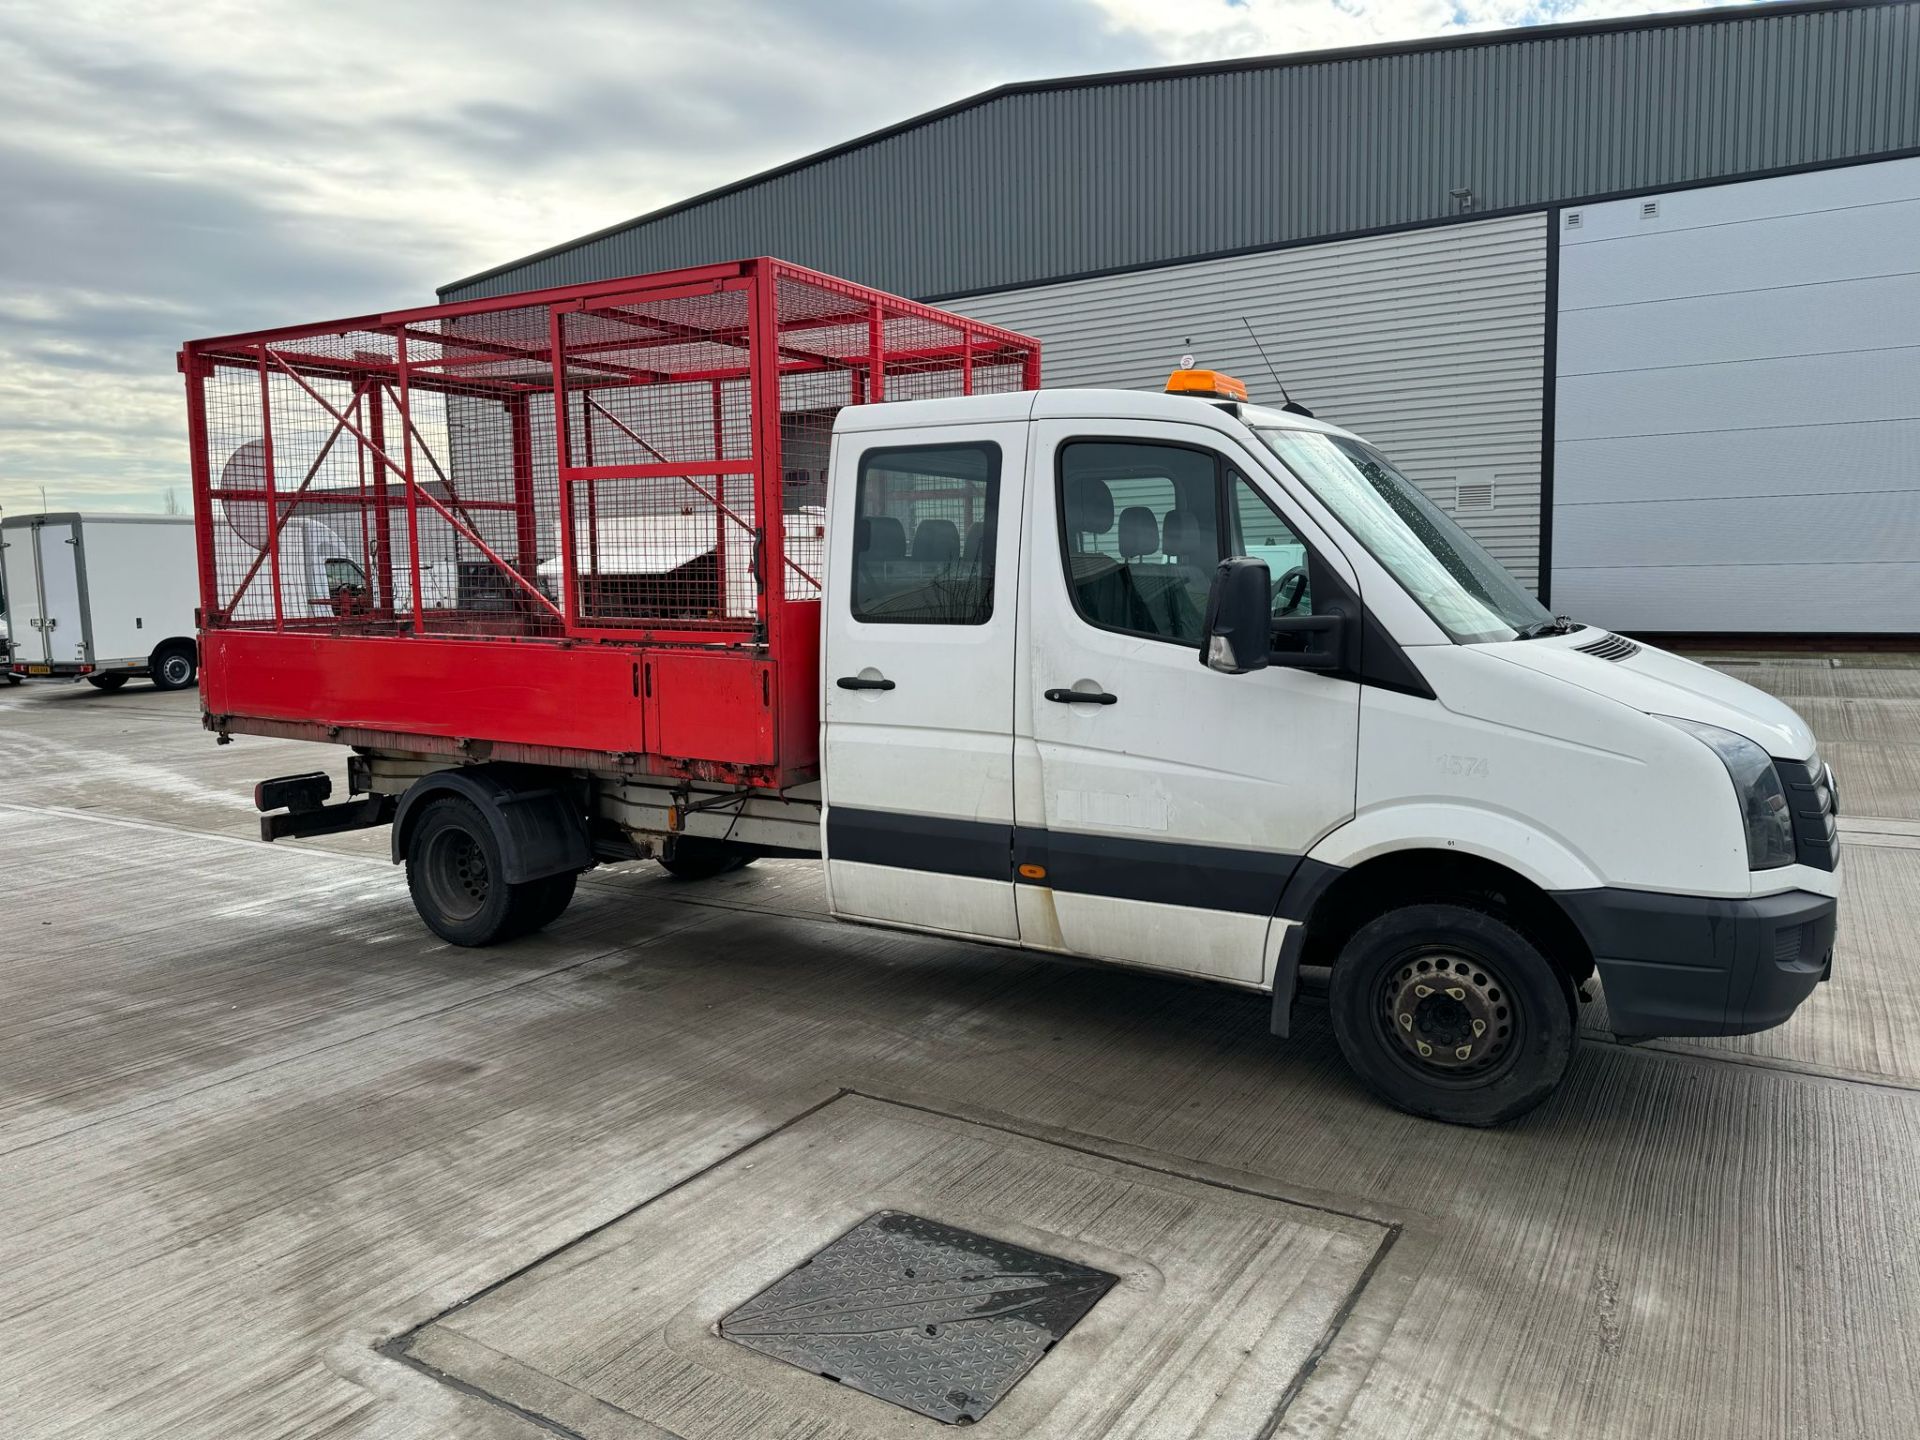 2013 - Volkswagen Crafter, Caged Tipper (Ex-Council Owned & Maintained)